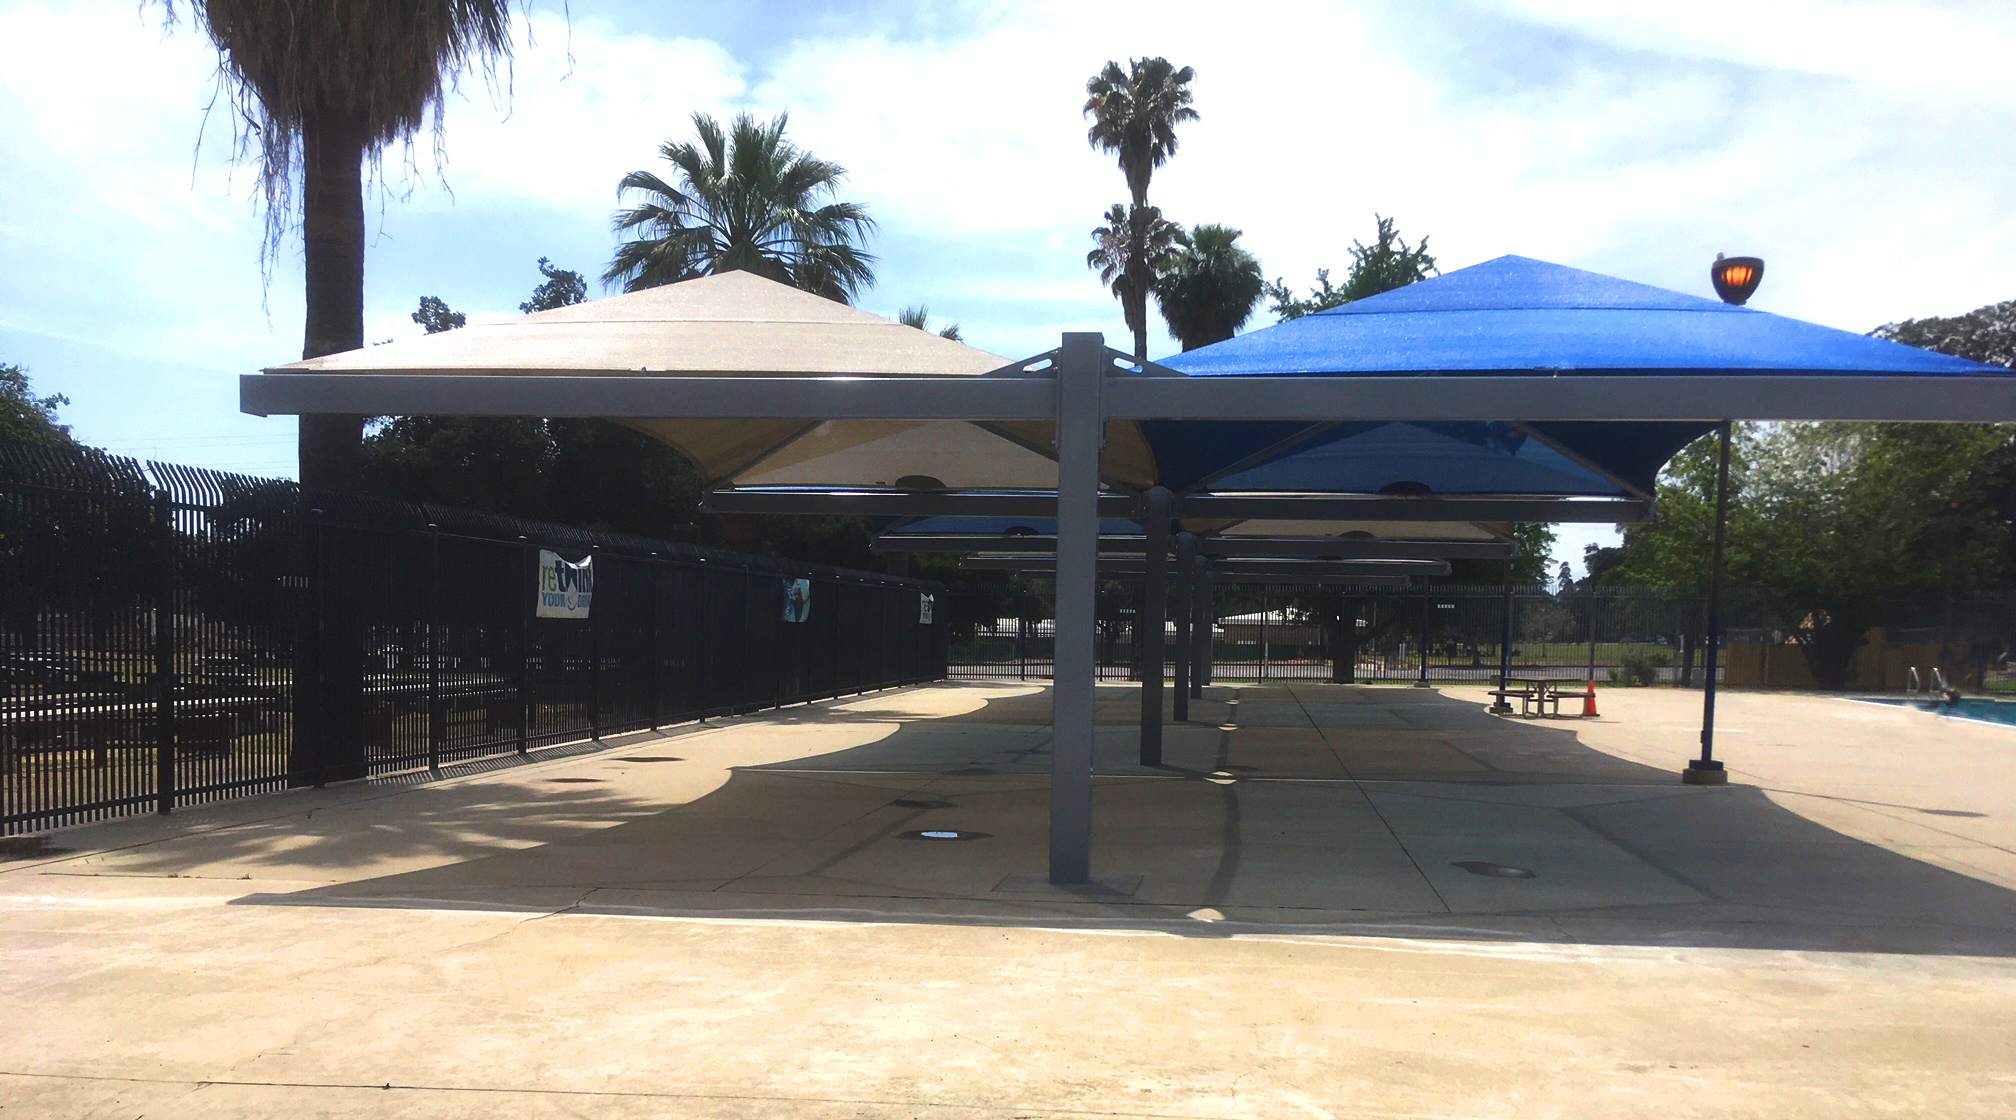 tan and blue shade structure